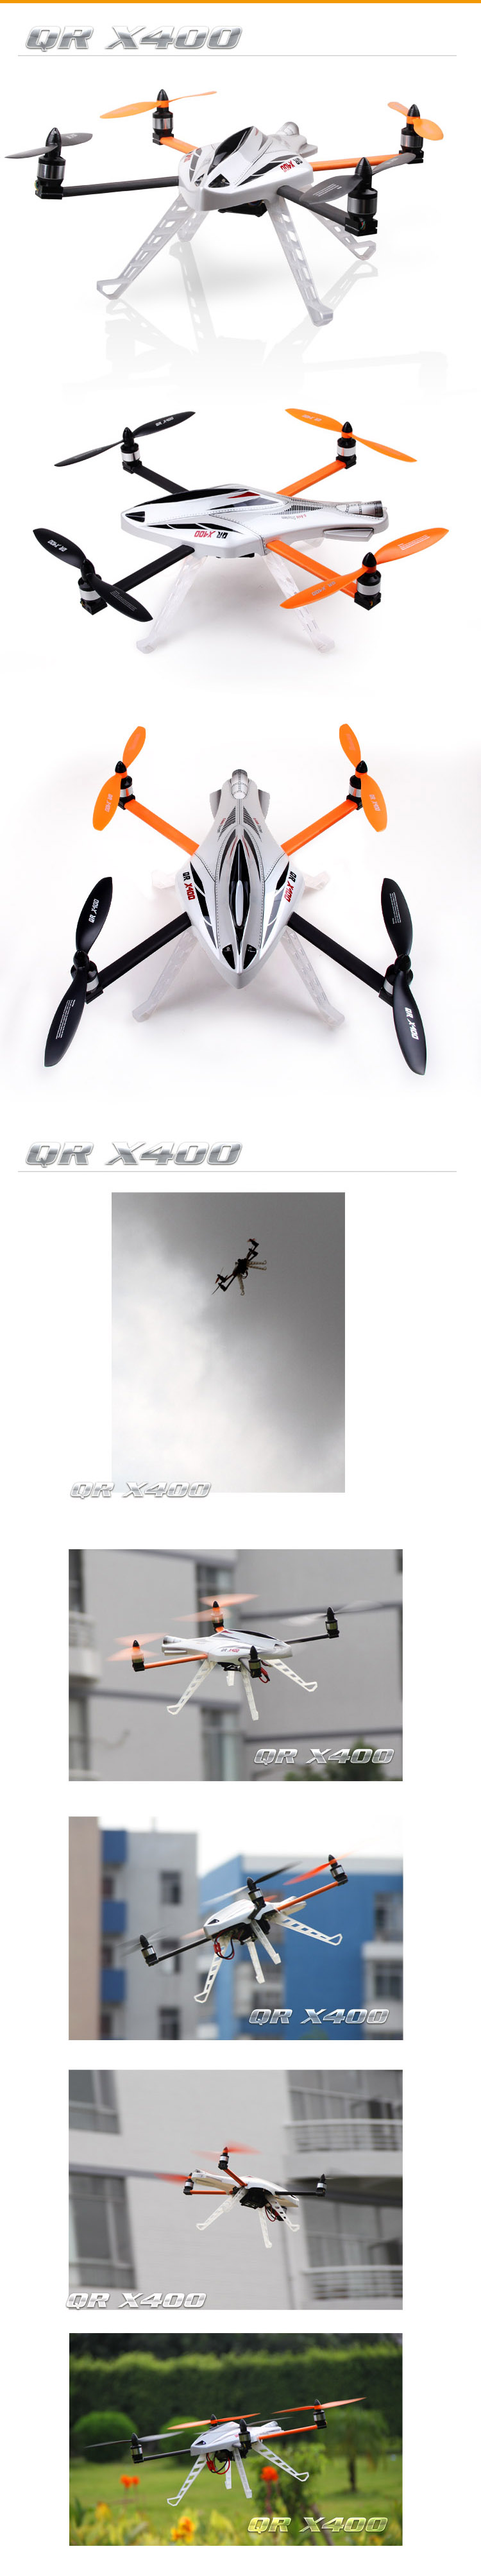 Walkera New QR X400 BNF 6-Achsen-Gyro UFO Quadcopter without Transmitter  with Aluminum Case